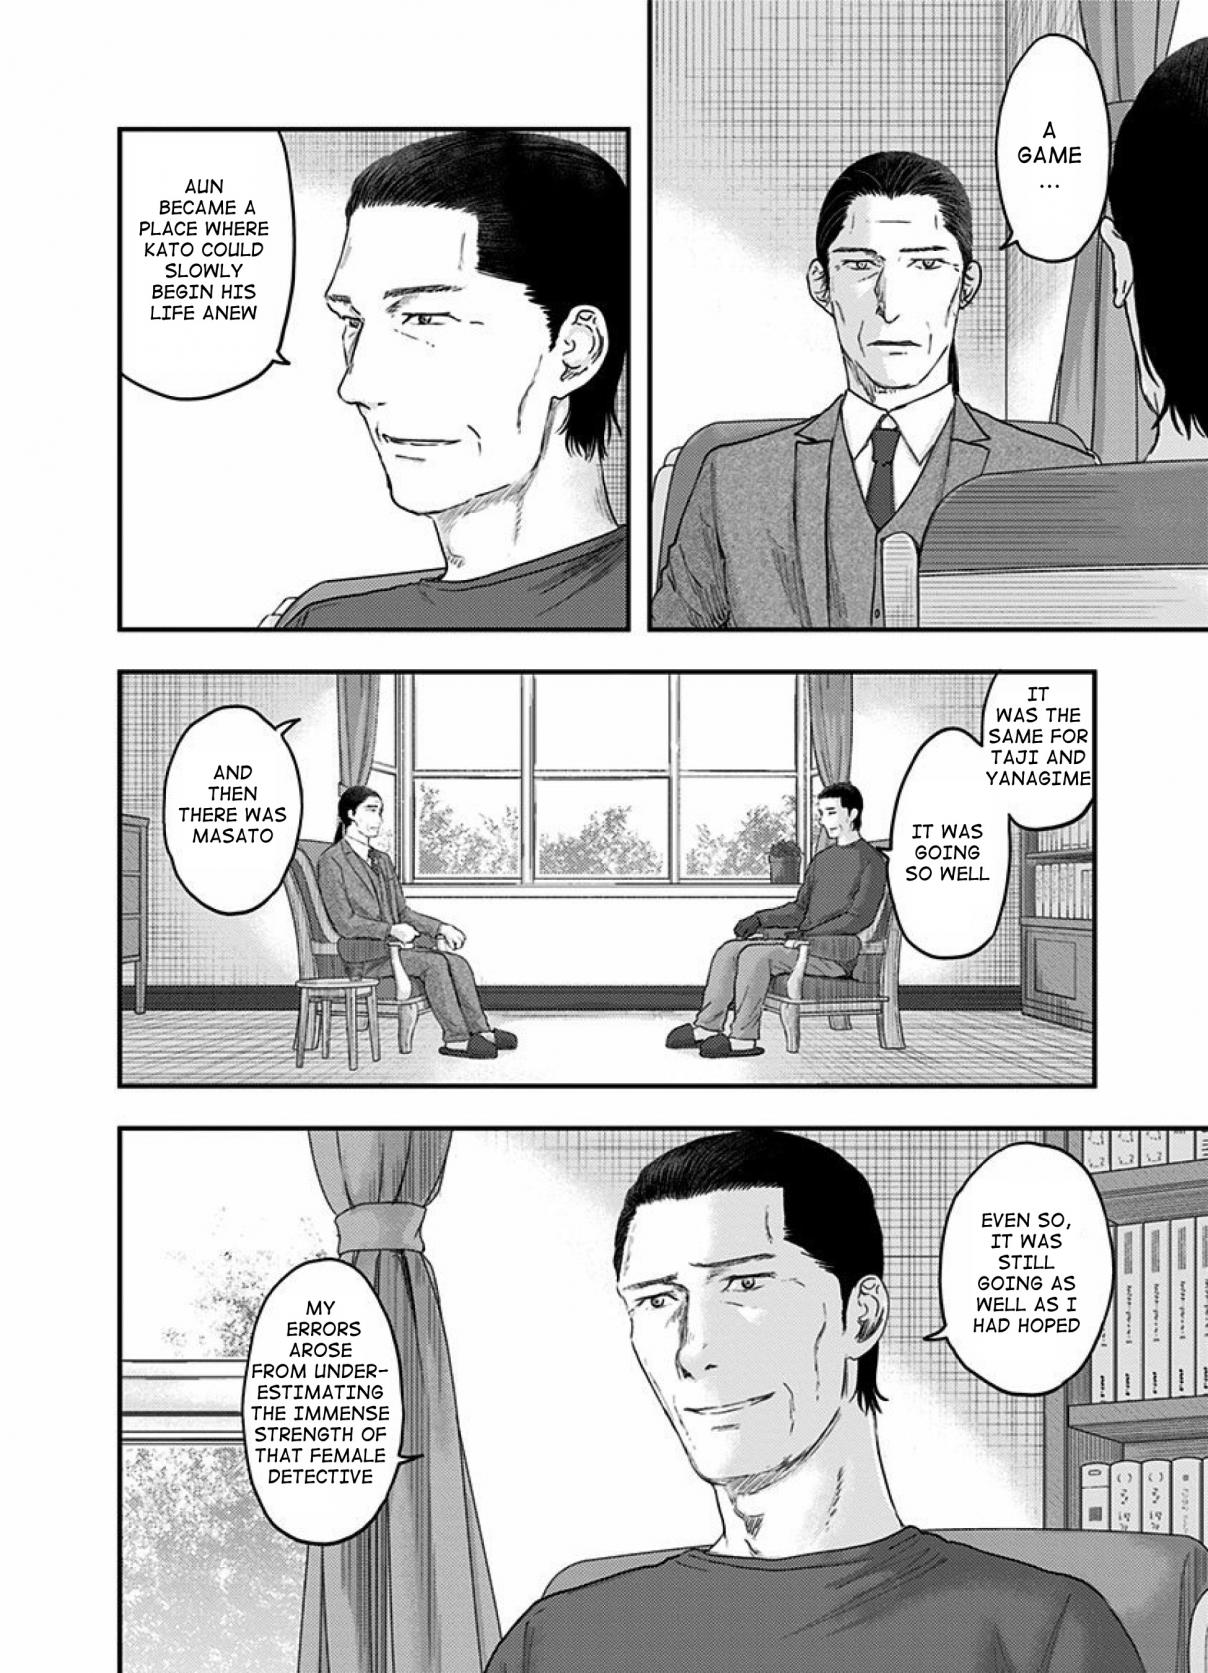 Route End Vol. 8 Ch. 54 The End Of The Beginning